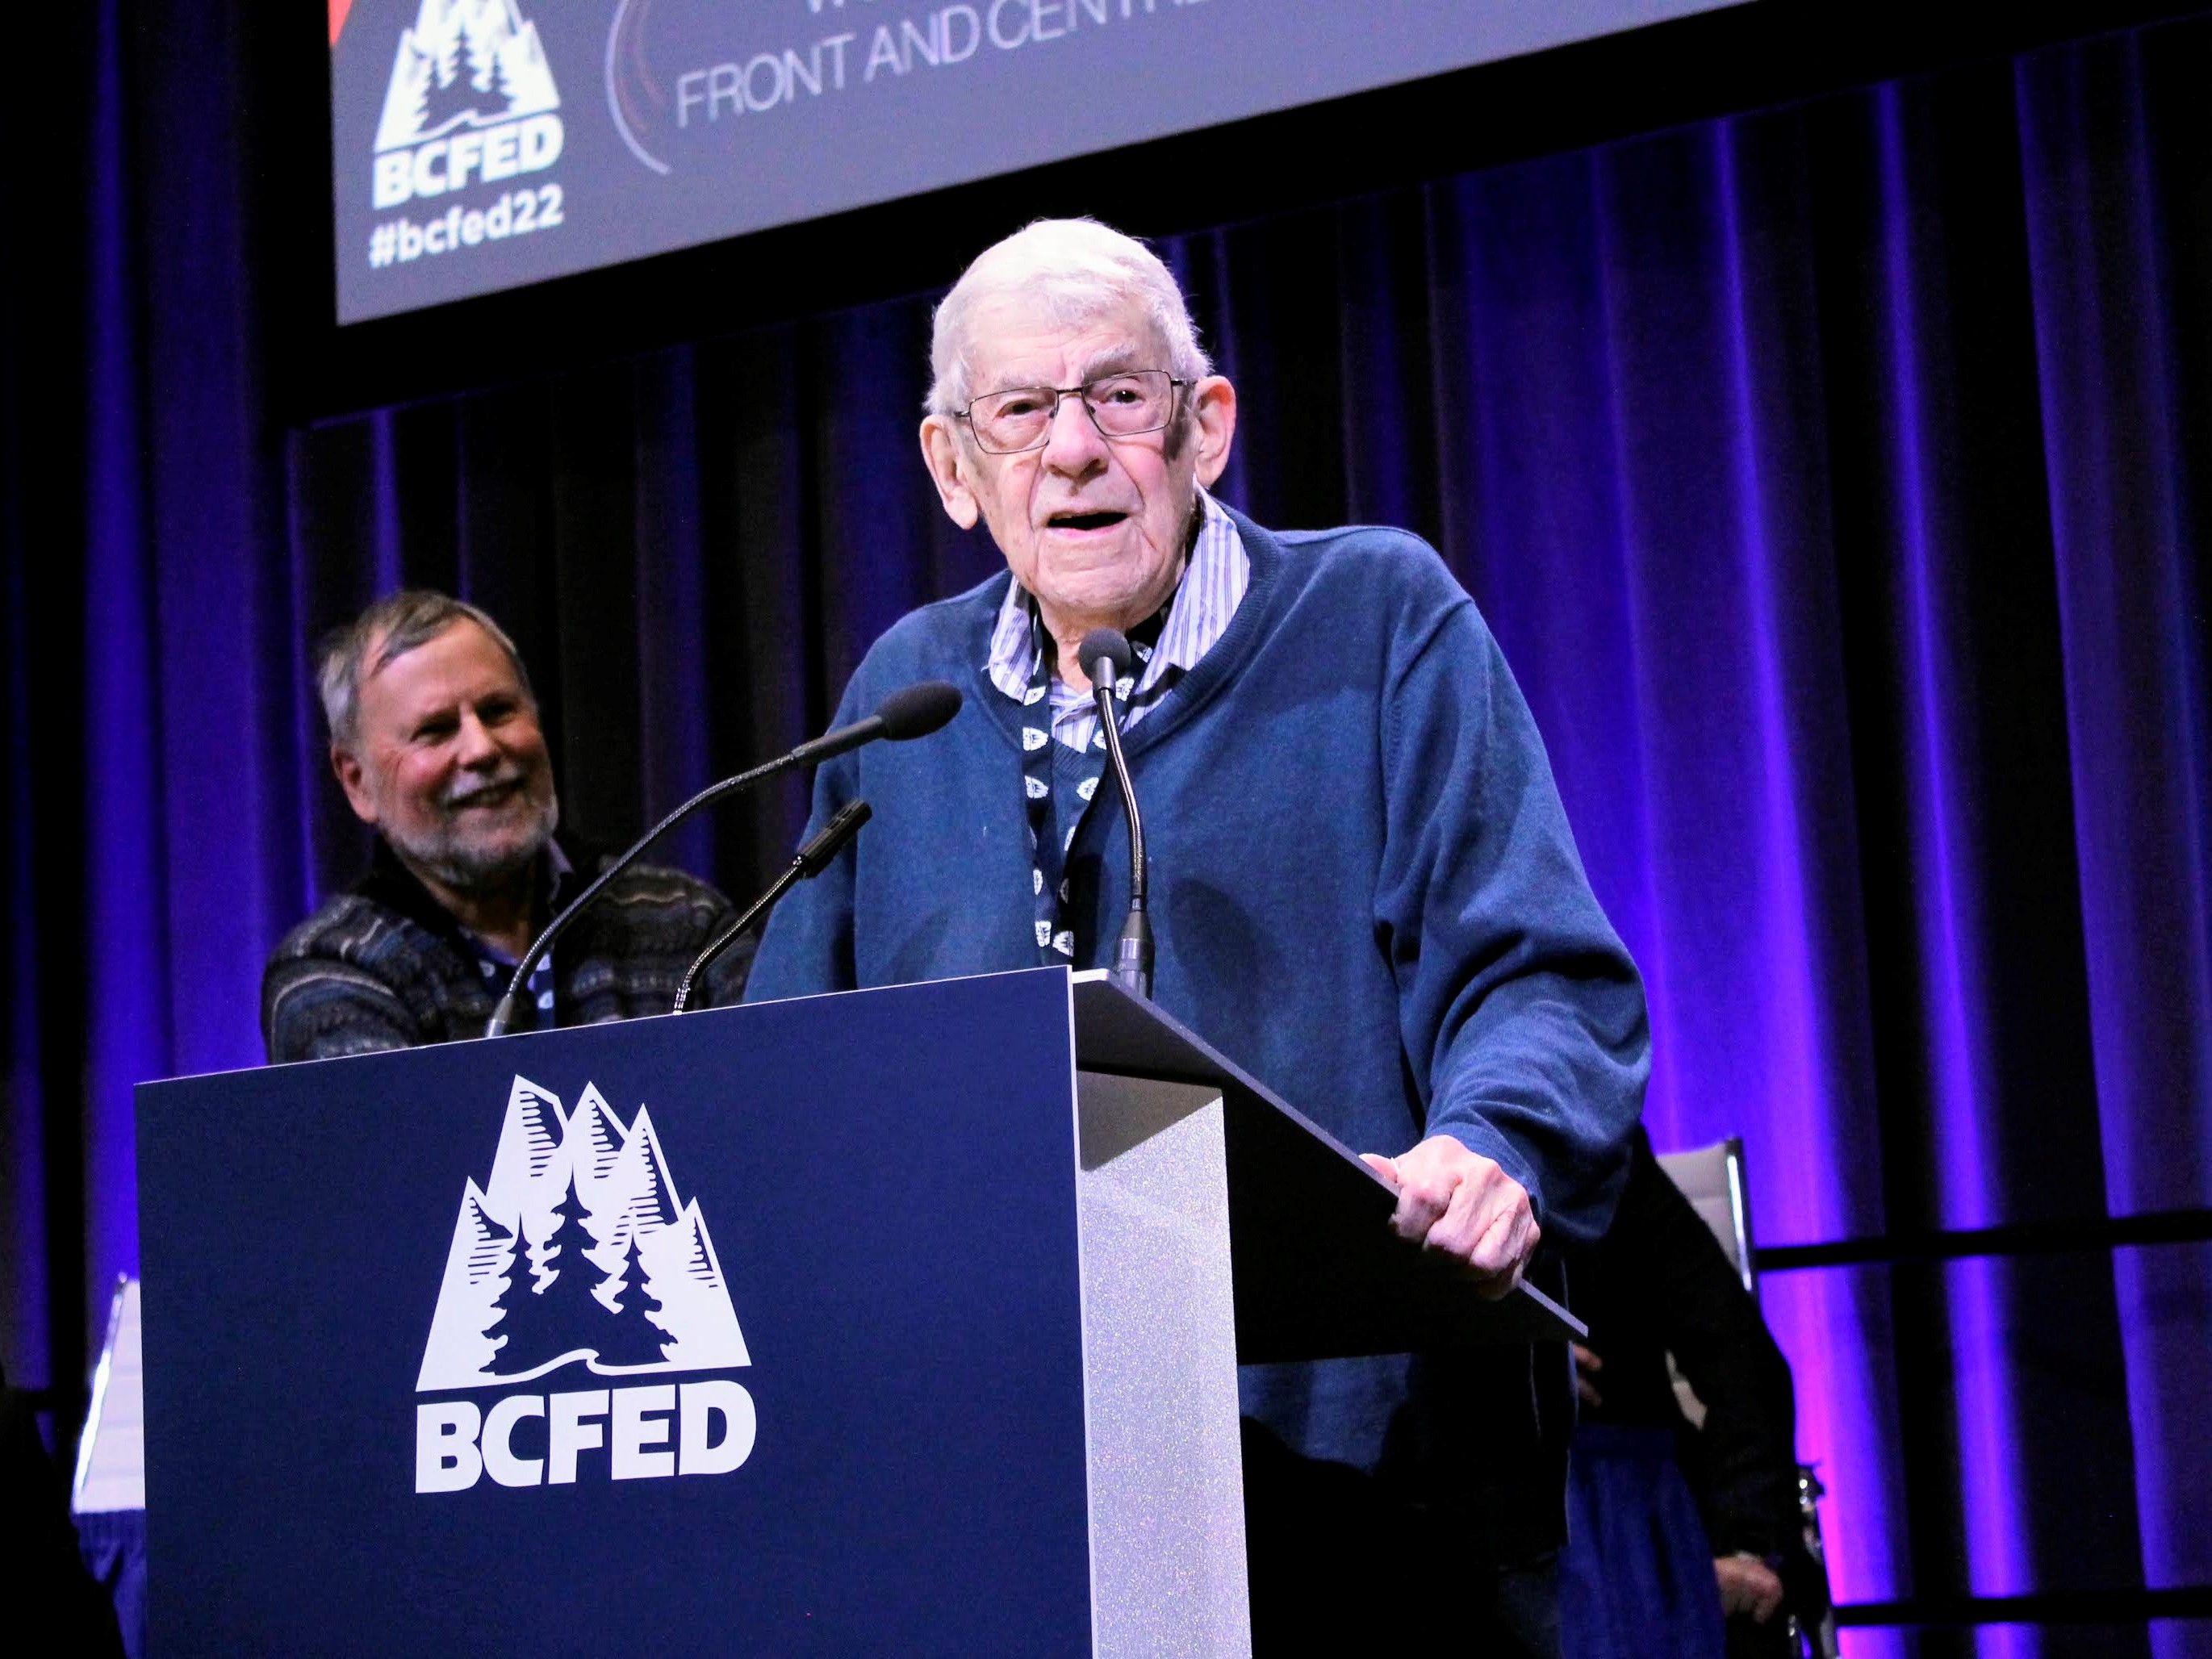 An elderly man wearing a navy blue sweater stands at a podium reading ‘BCFED.’ A royal blue curtain is behind him.